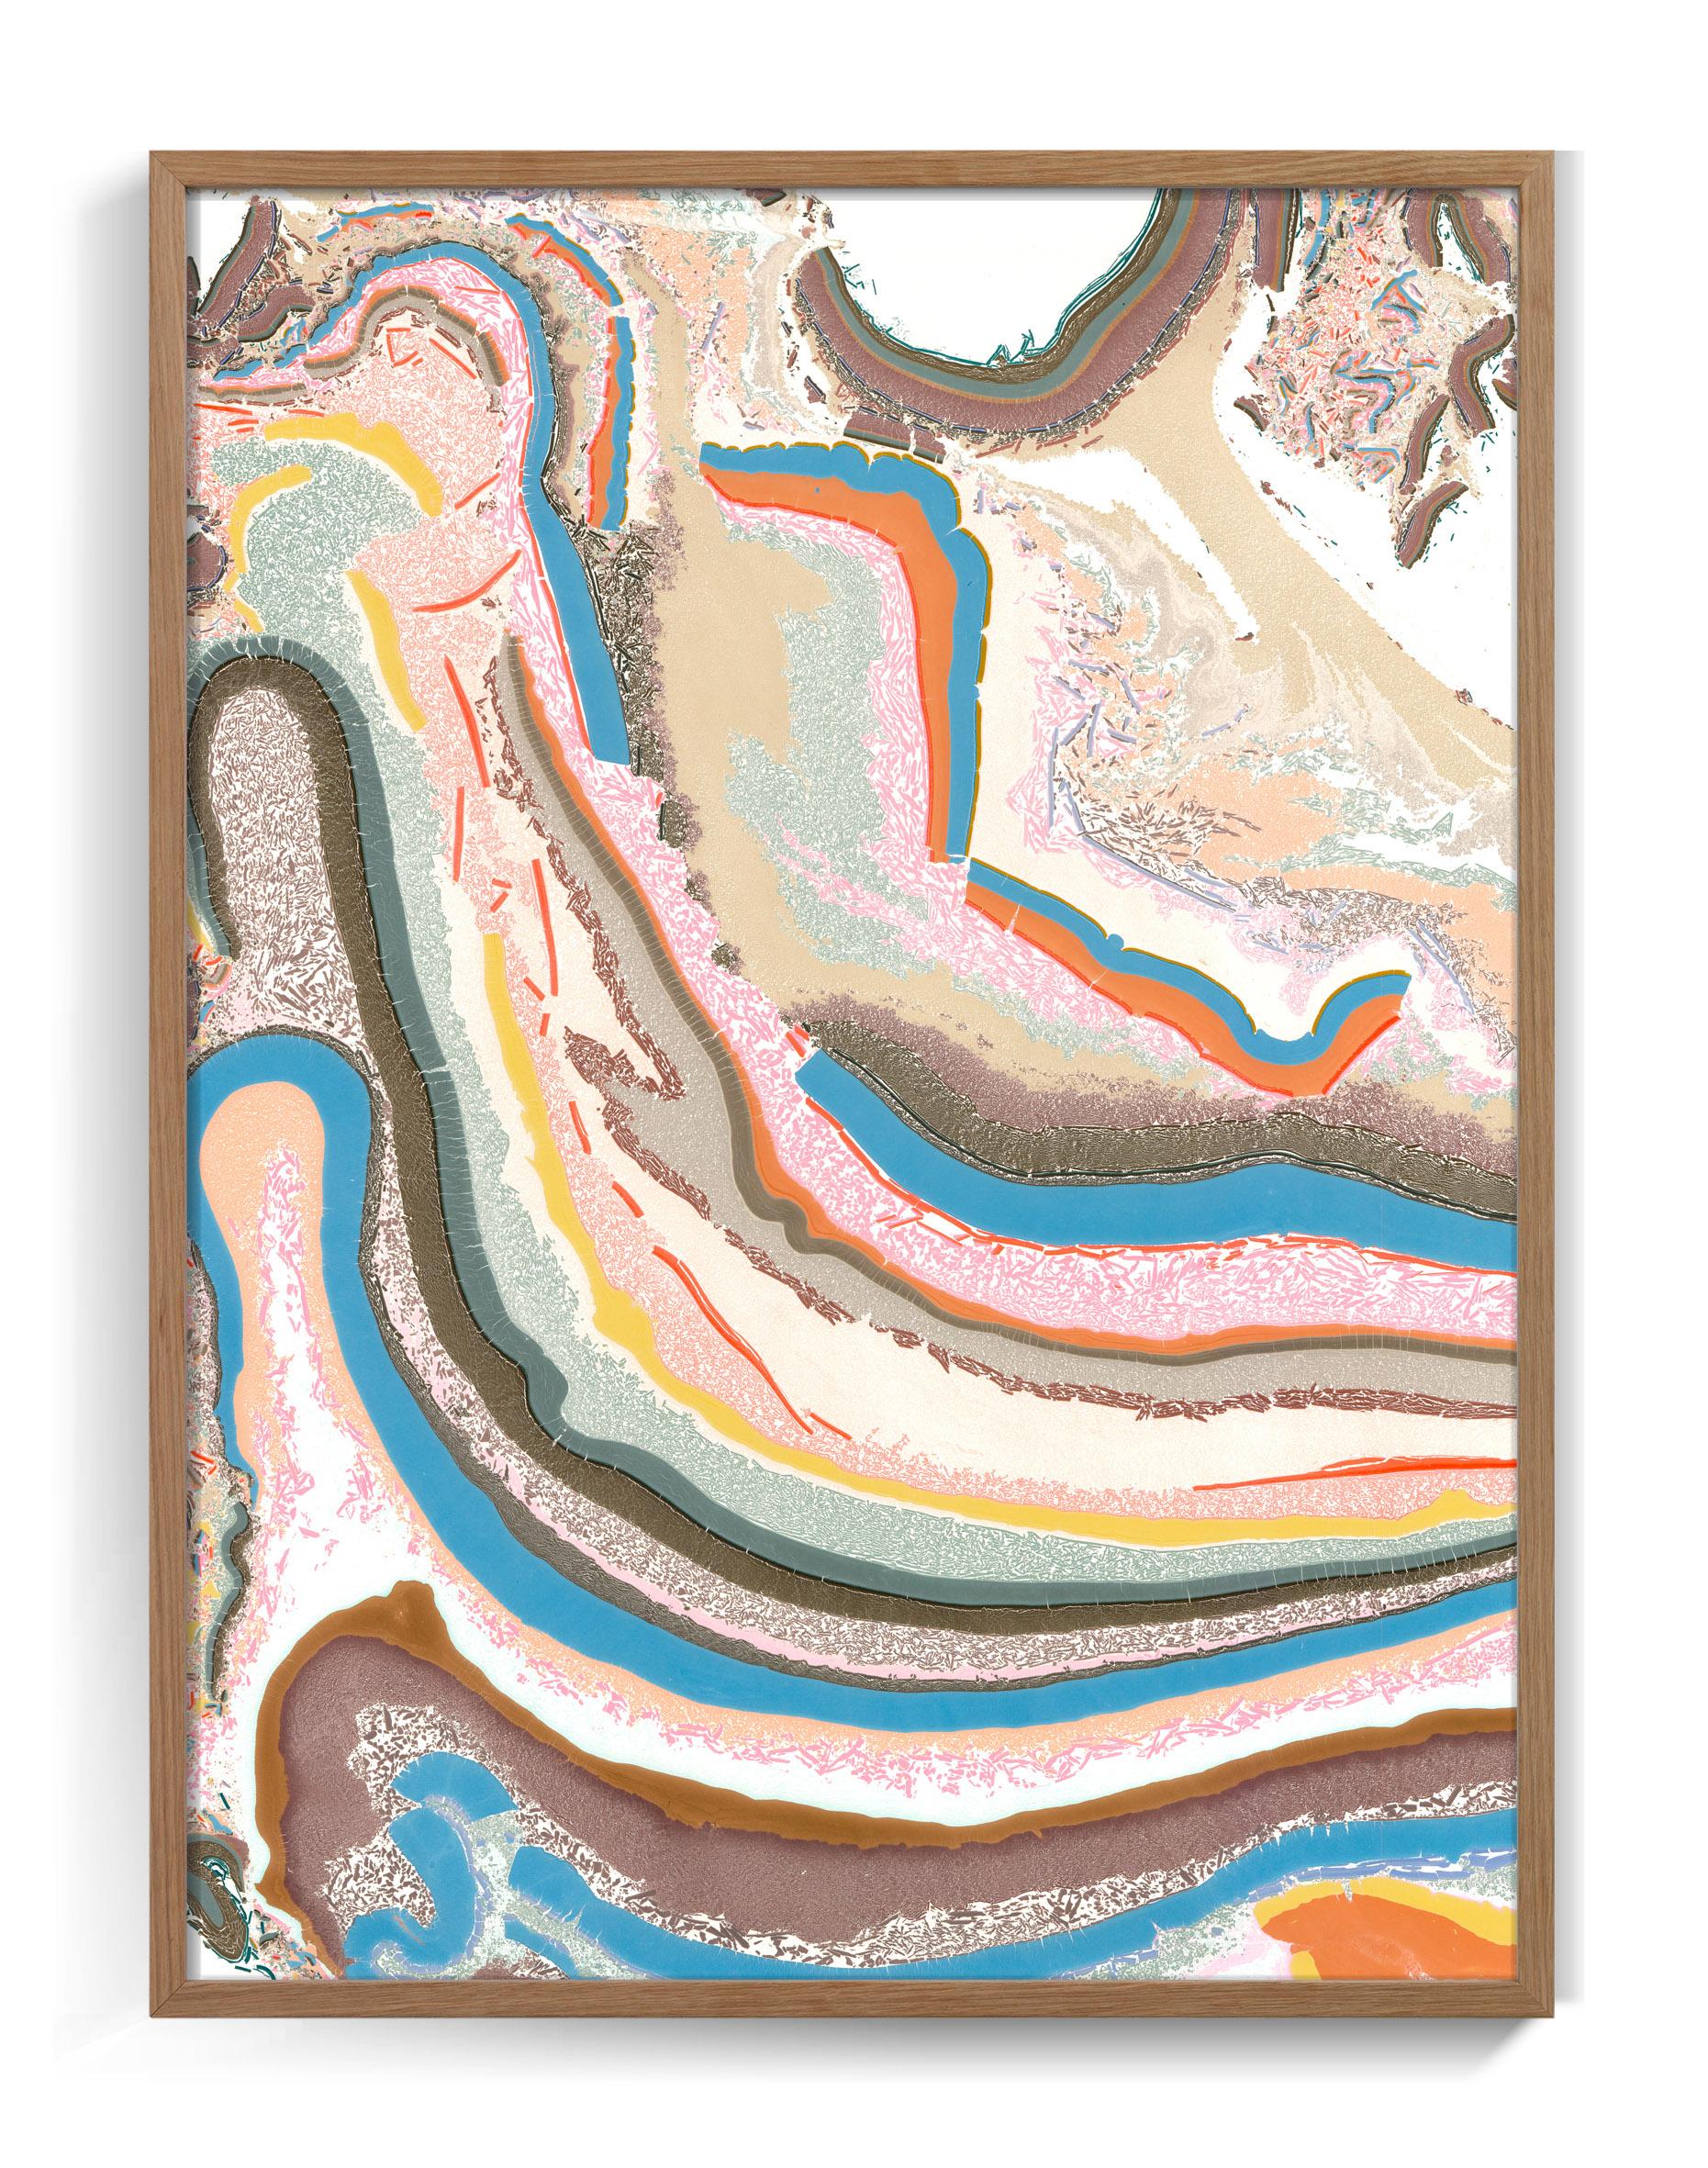 Danish artist Pernille Snedker’s unique marbling artwork—delicately weaving fragments of colored stripes into an intricate composition.
The piece harmoniously blends shades of blue with subtle hints of black, sand, lilac, light blue, salmon, and